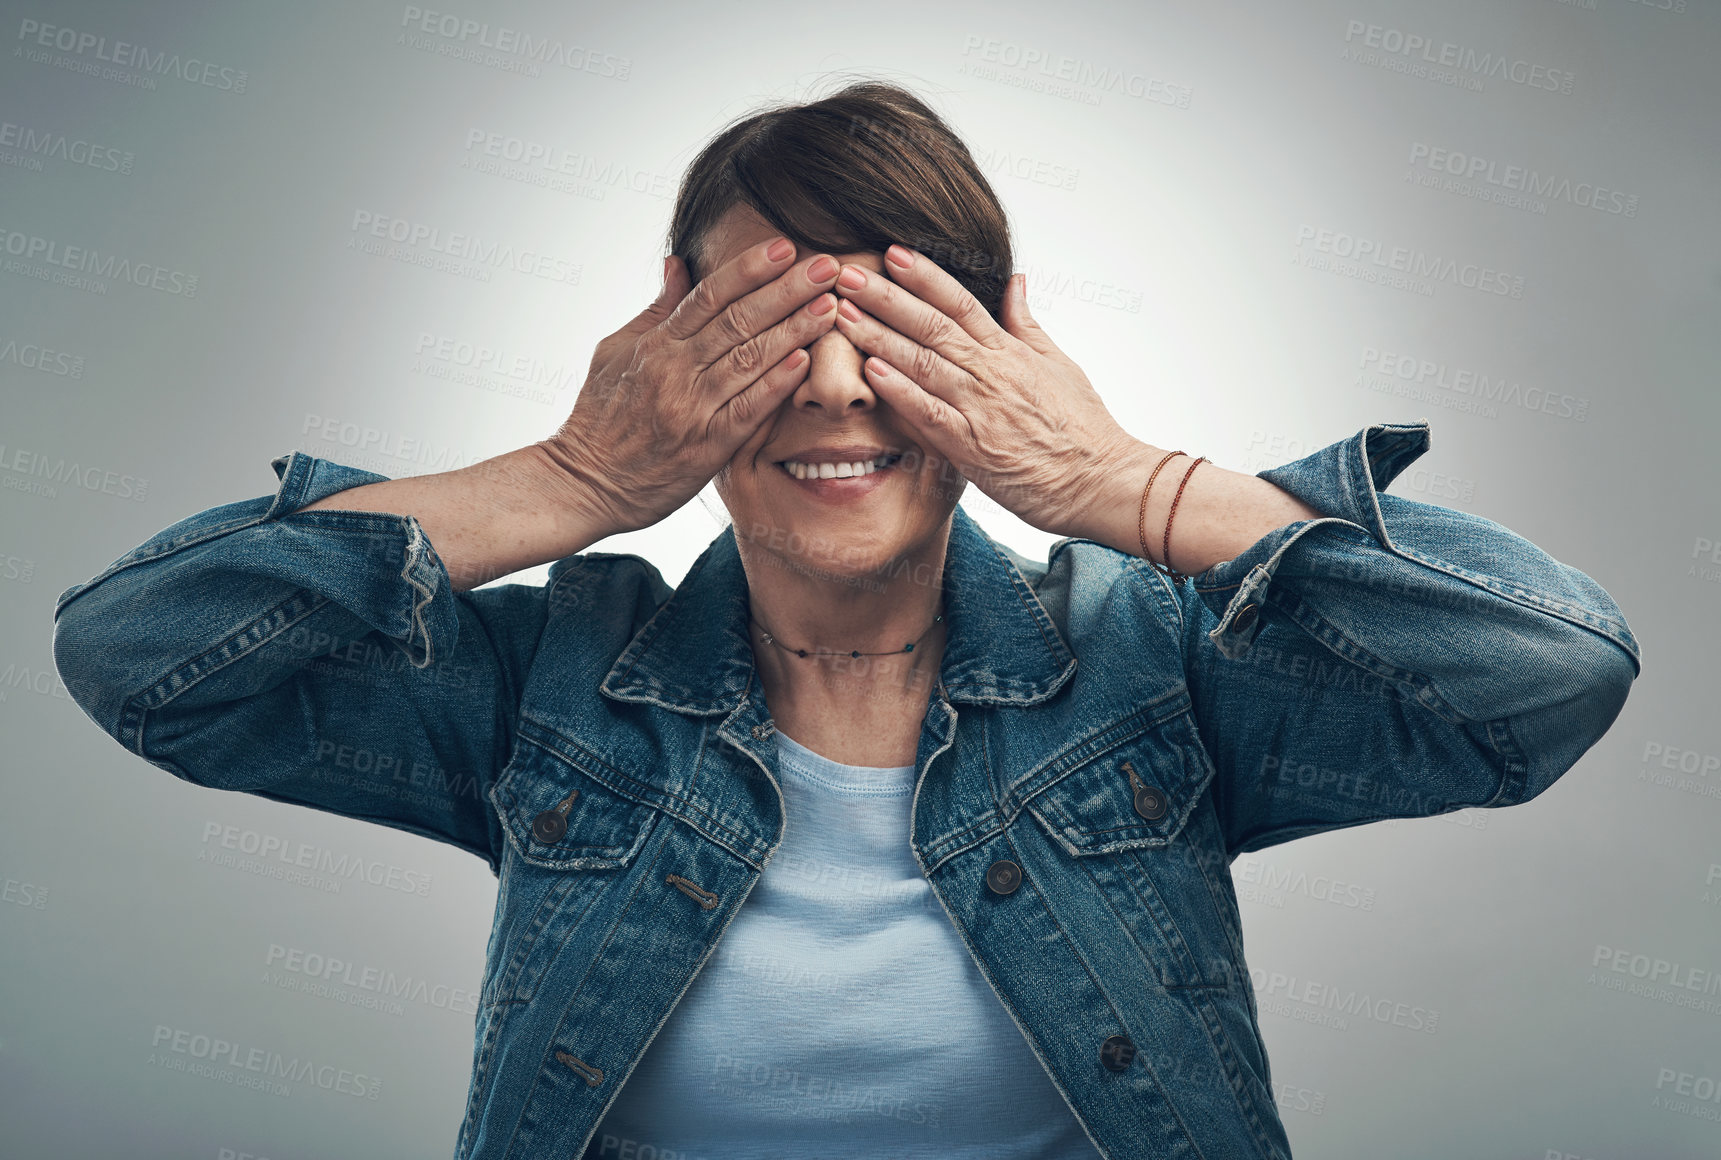 Buy stock photo Studio shot of a senior woman covering her eyes against a grey background